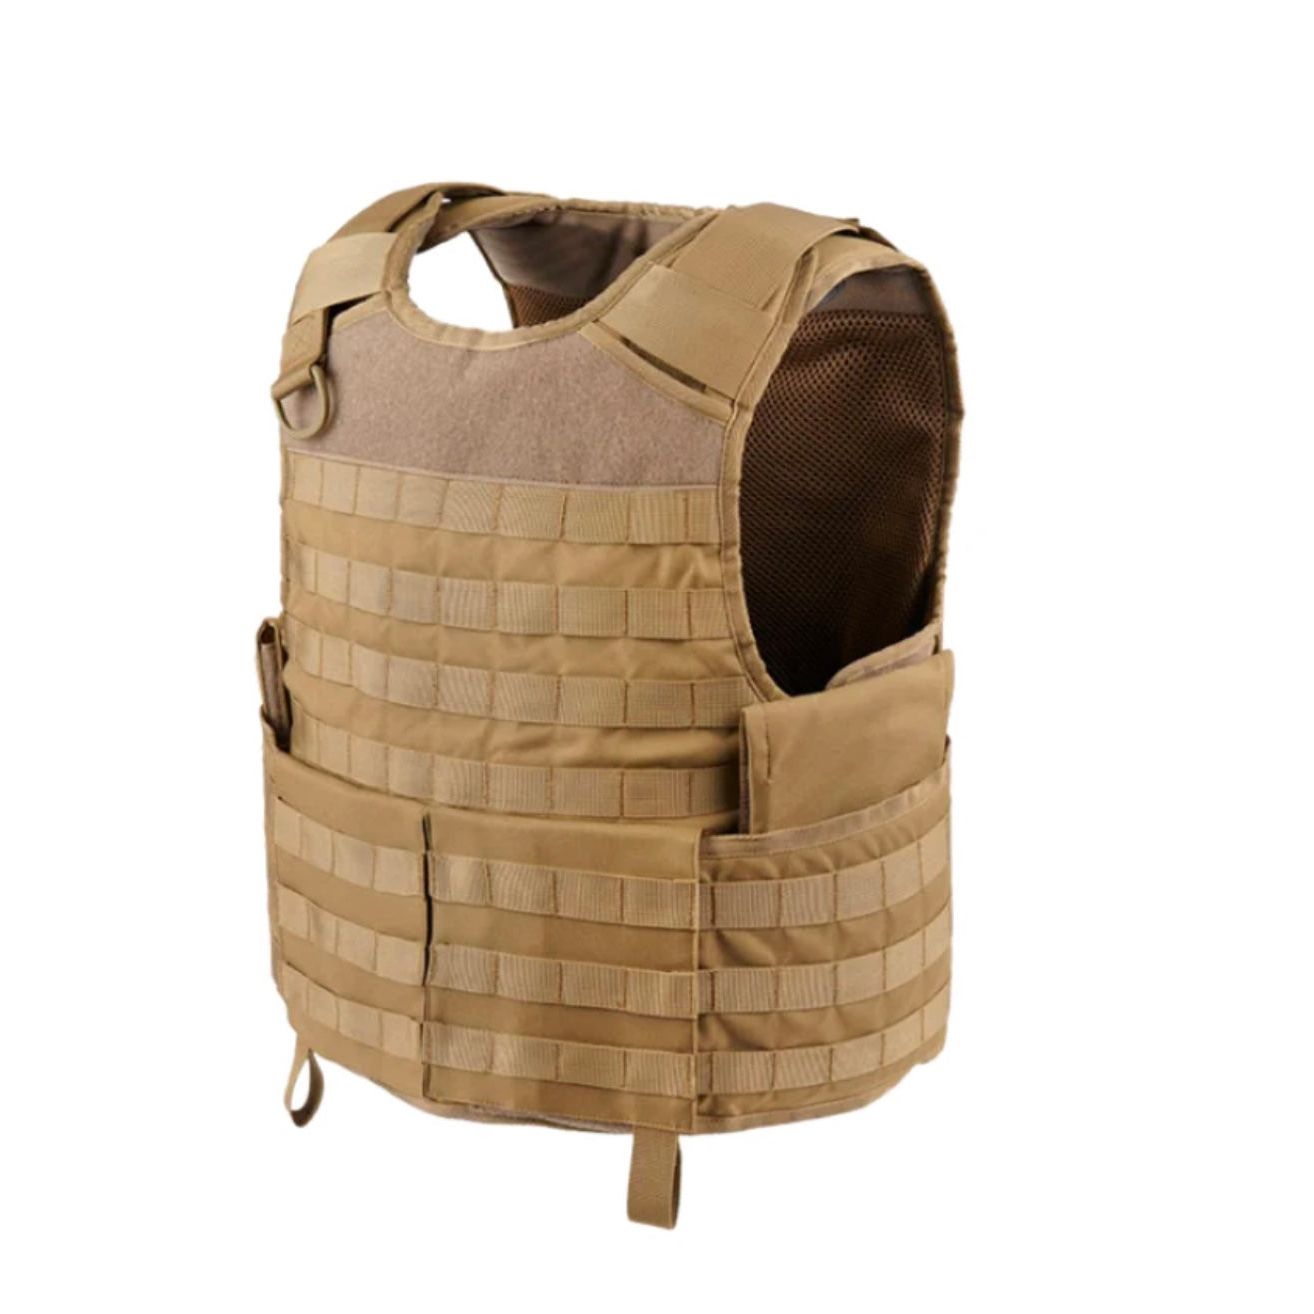 Ballistic protective vest CEST 1.2 - with Molle system